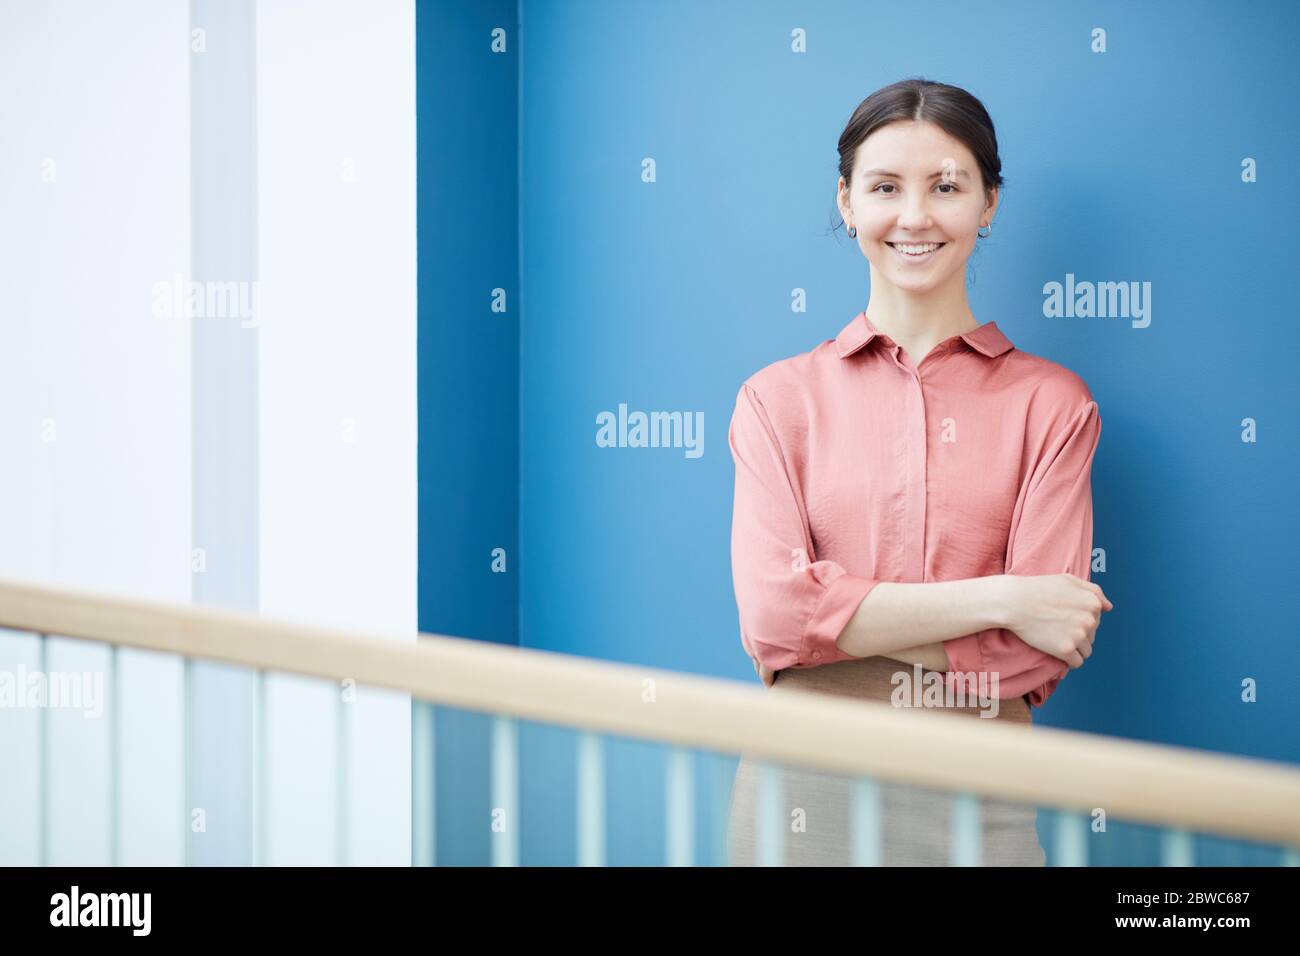 Waist up portrait of young elegant businesswoman smiling at camera while leaning against blue wall, copy space Stock Photo